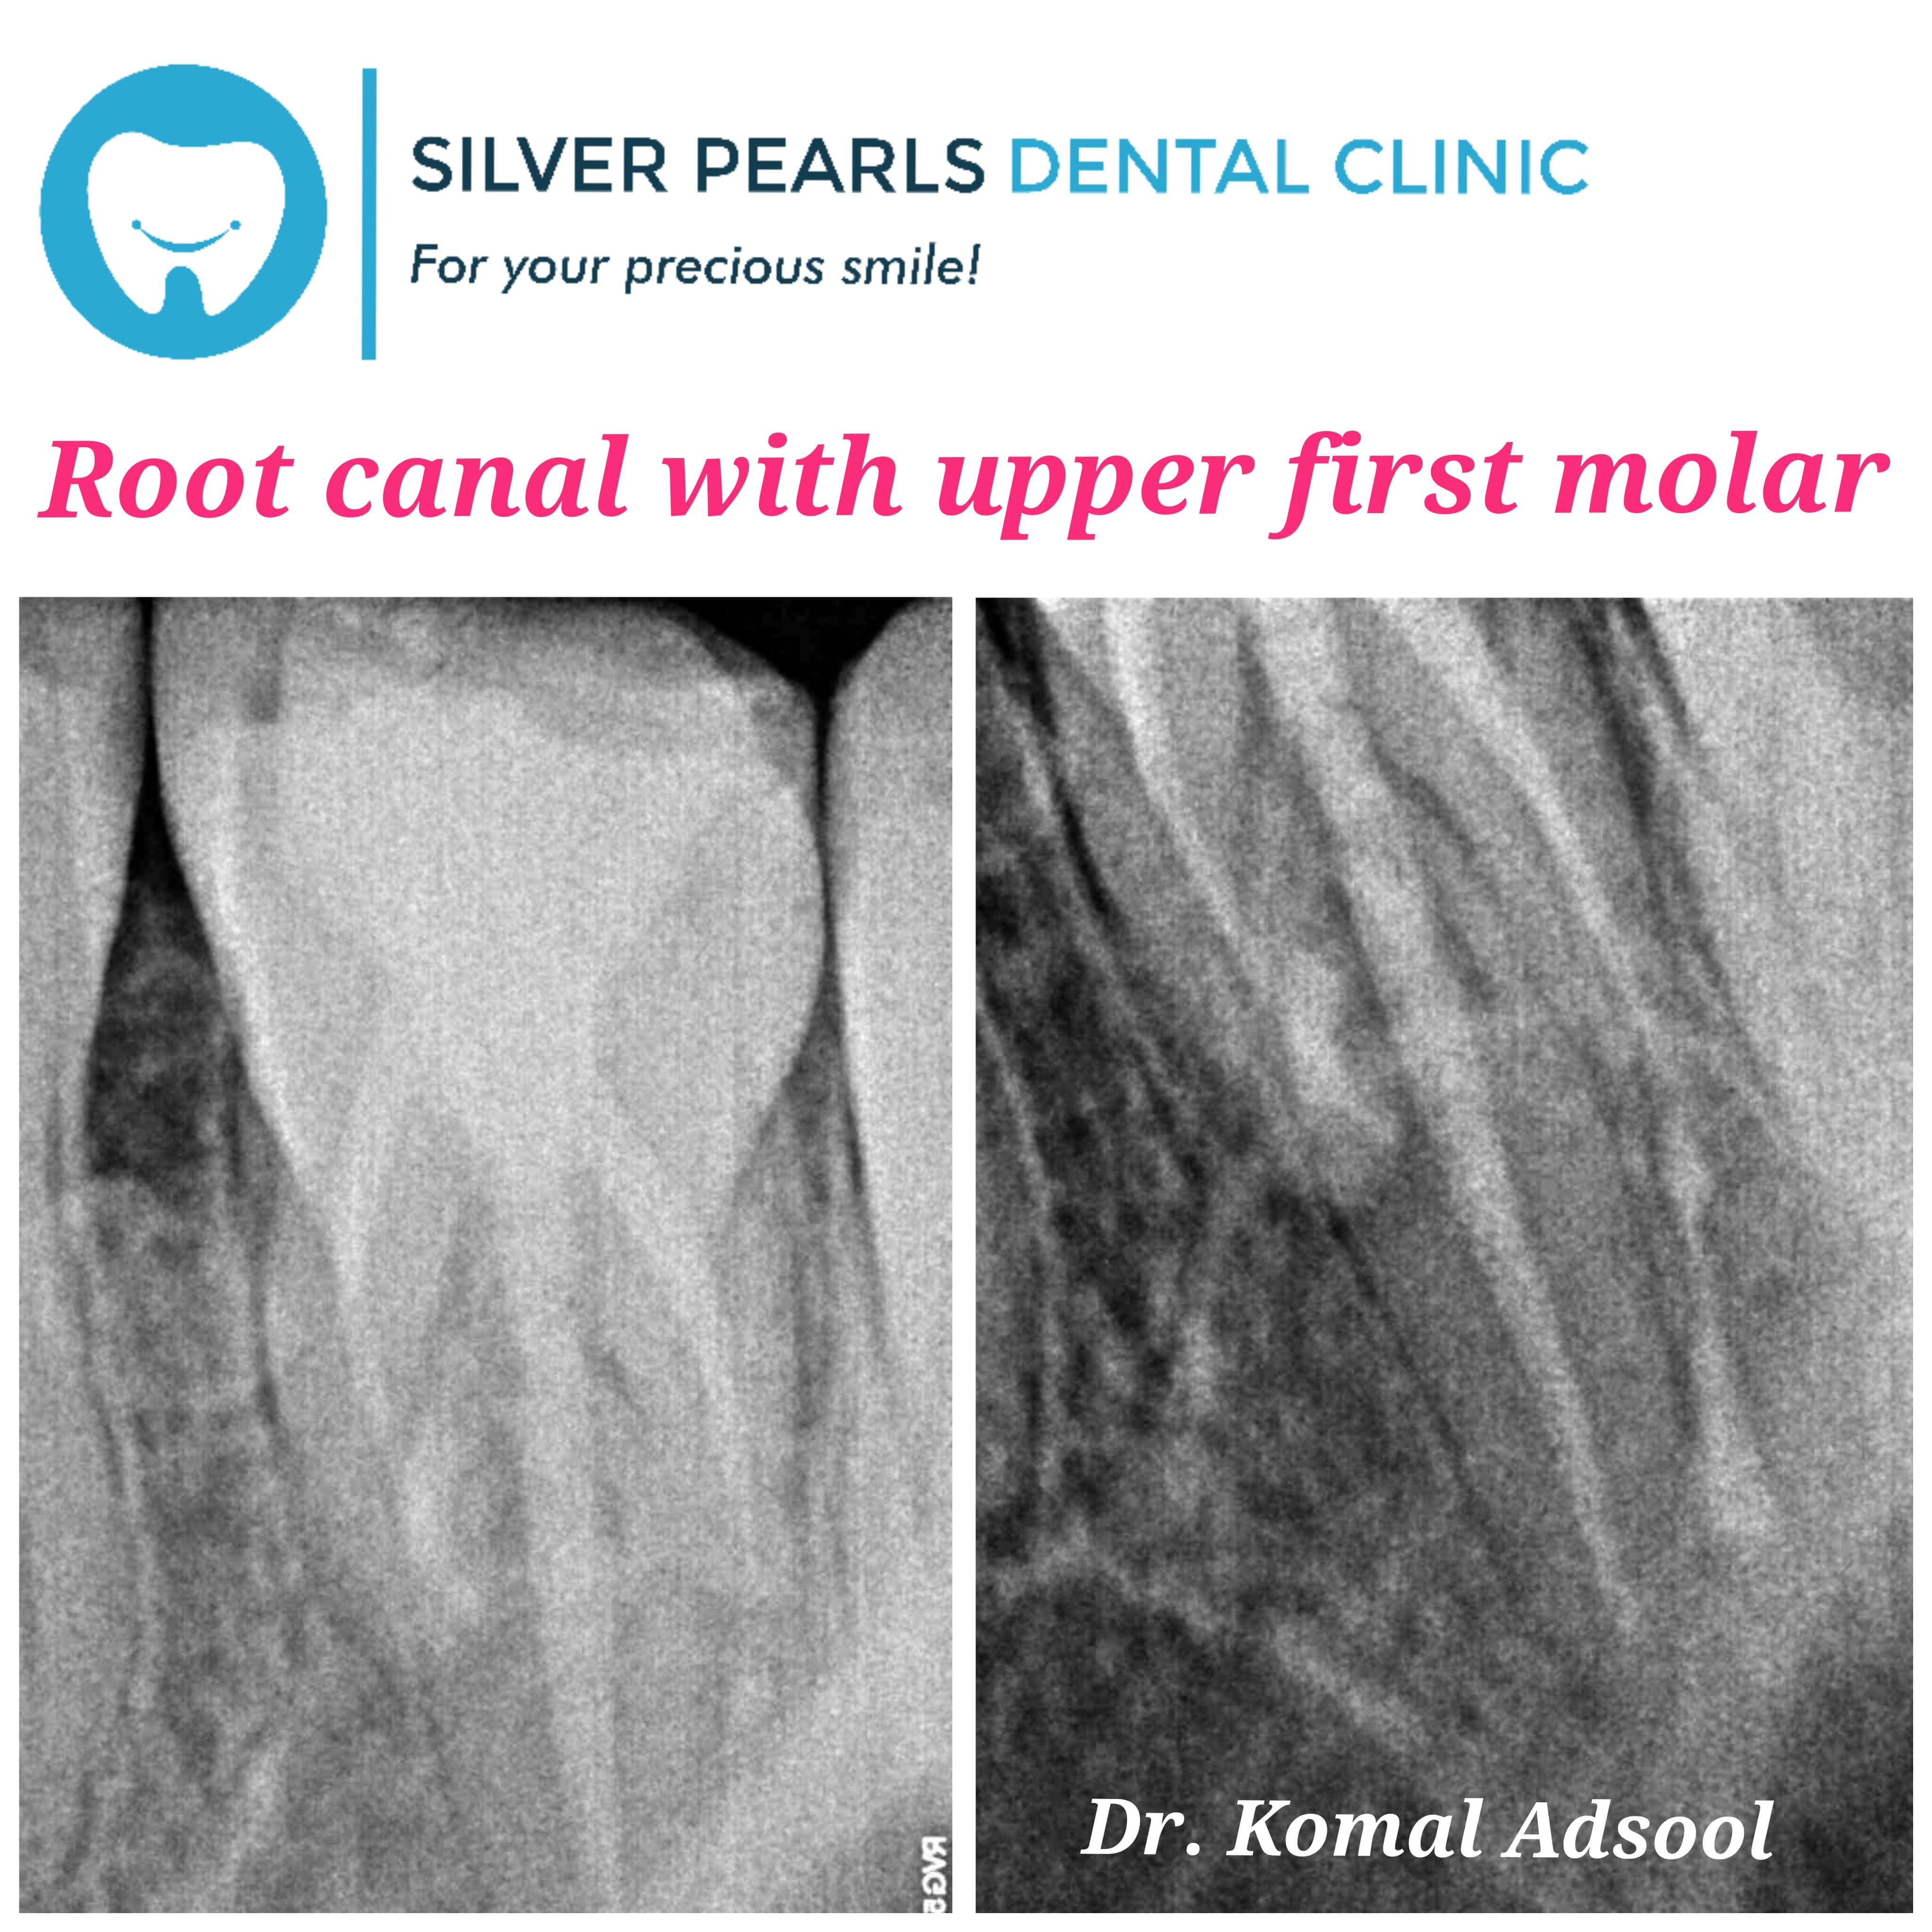 Root canal treatment with upper first molar by dentist in Kothrud, Dr. Komal Adsool.